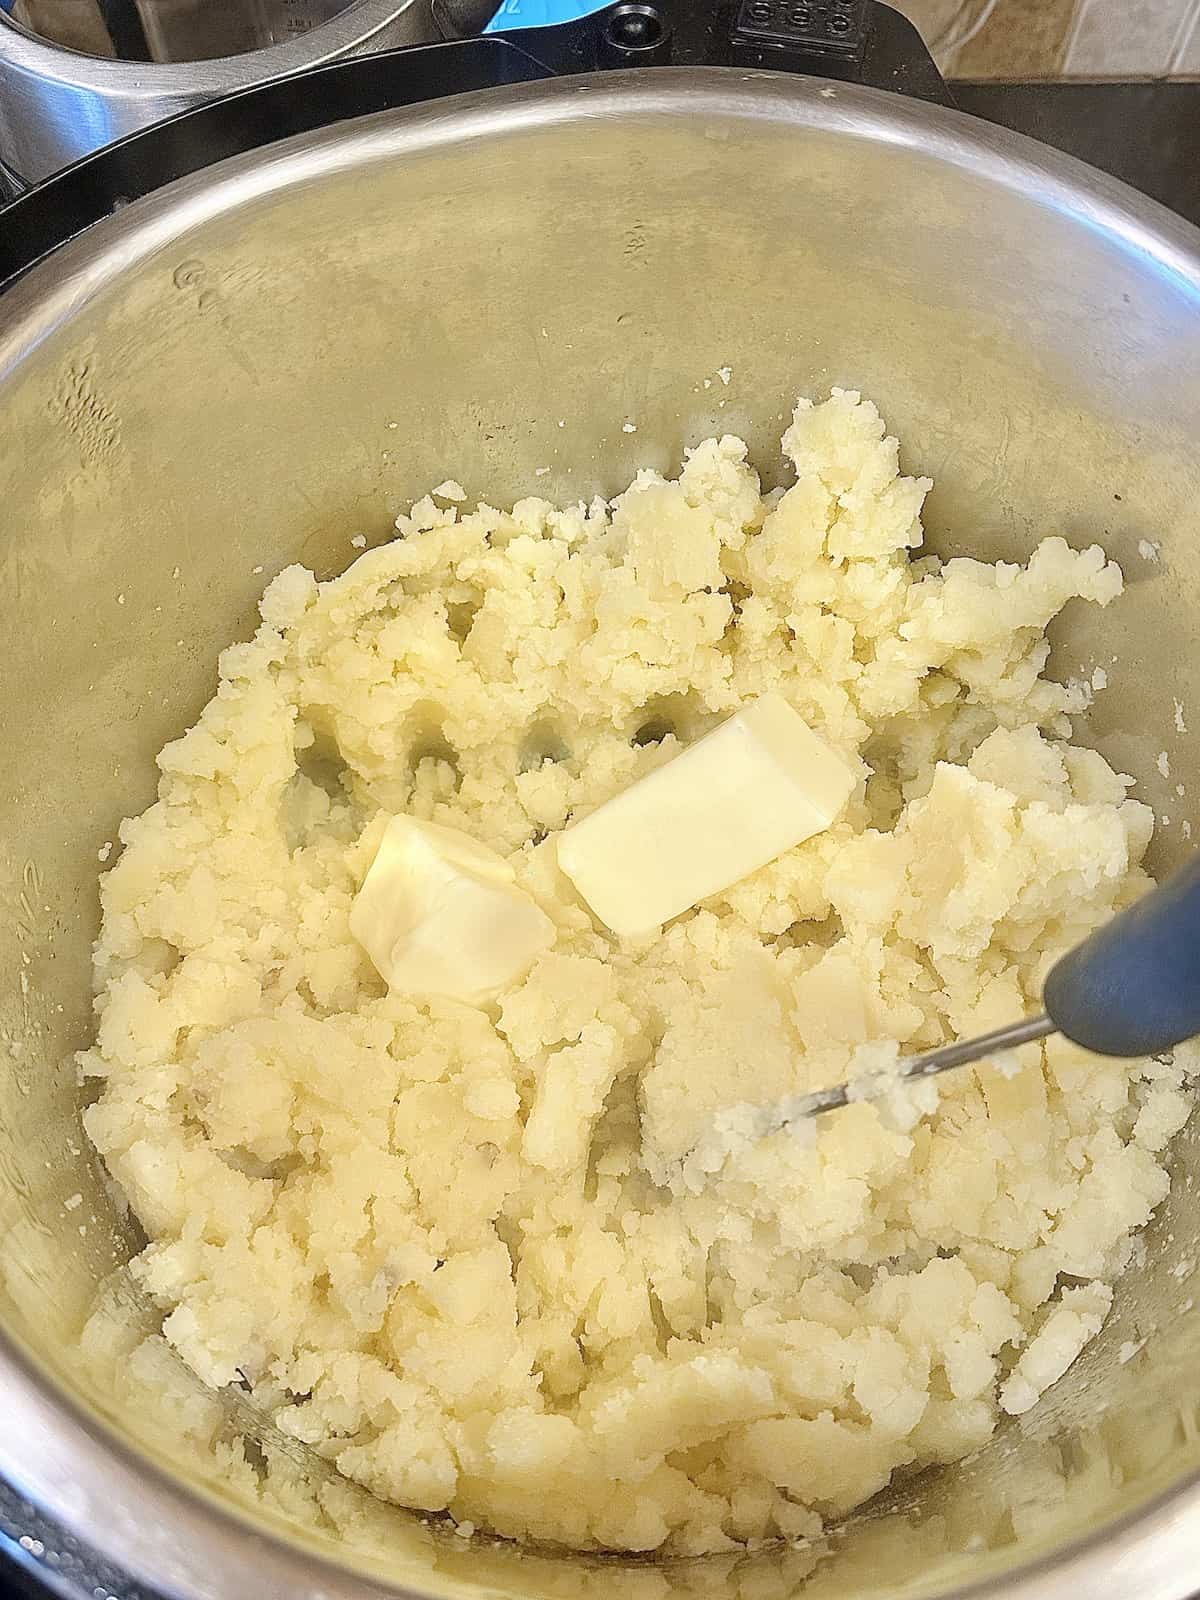 mashed potatoes in a pressure cooker with a stick of butter, milk, salt and pepper